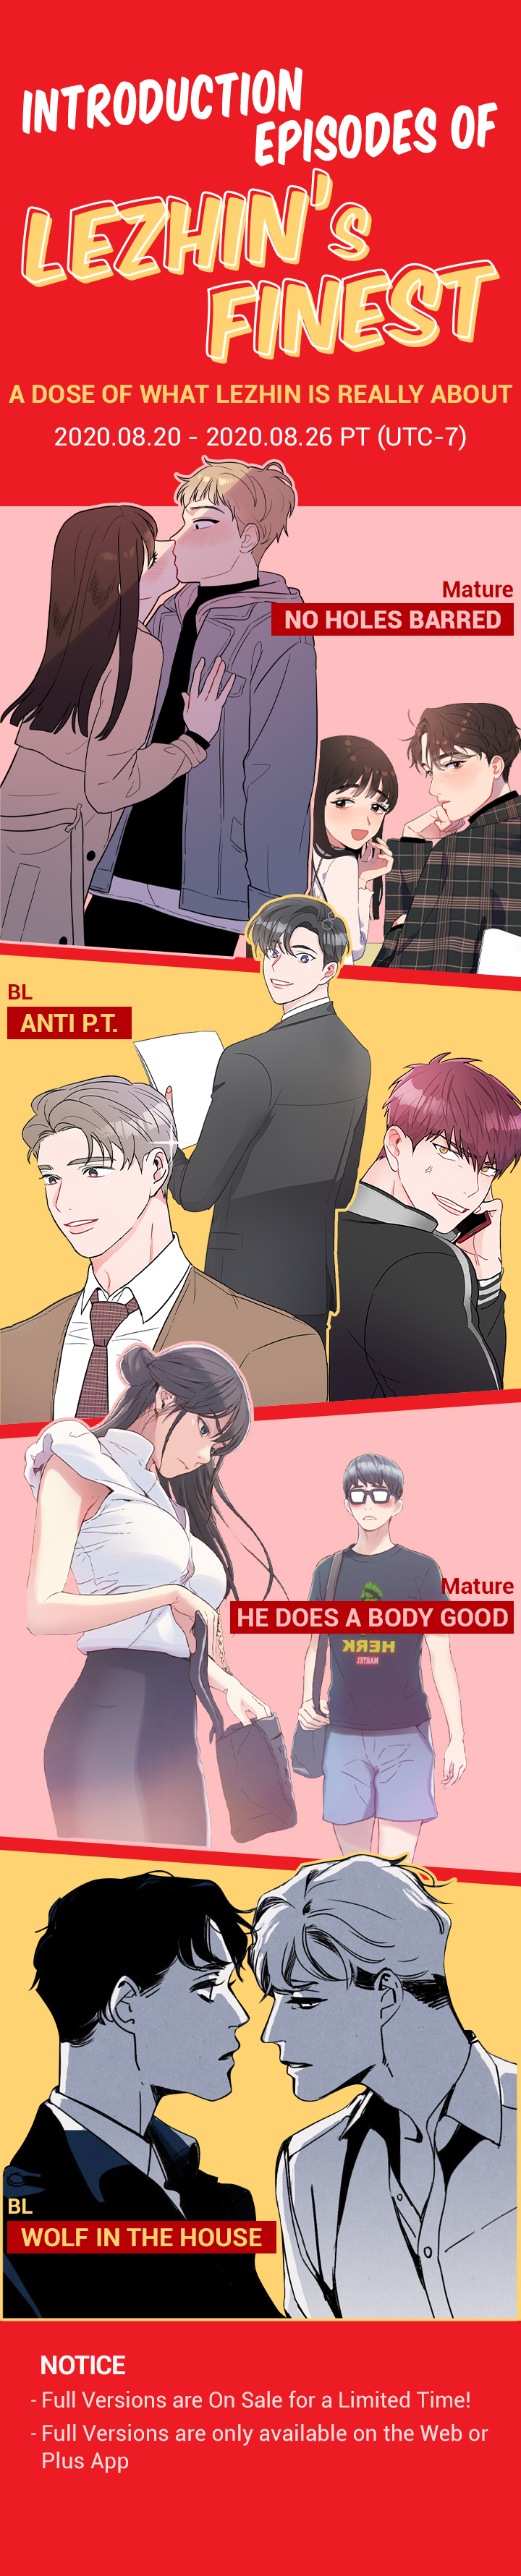 Introduction Episodes of Lezhin's Finest - A Dose of What Lezhin is Really  About - Lezhin Comics